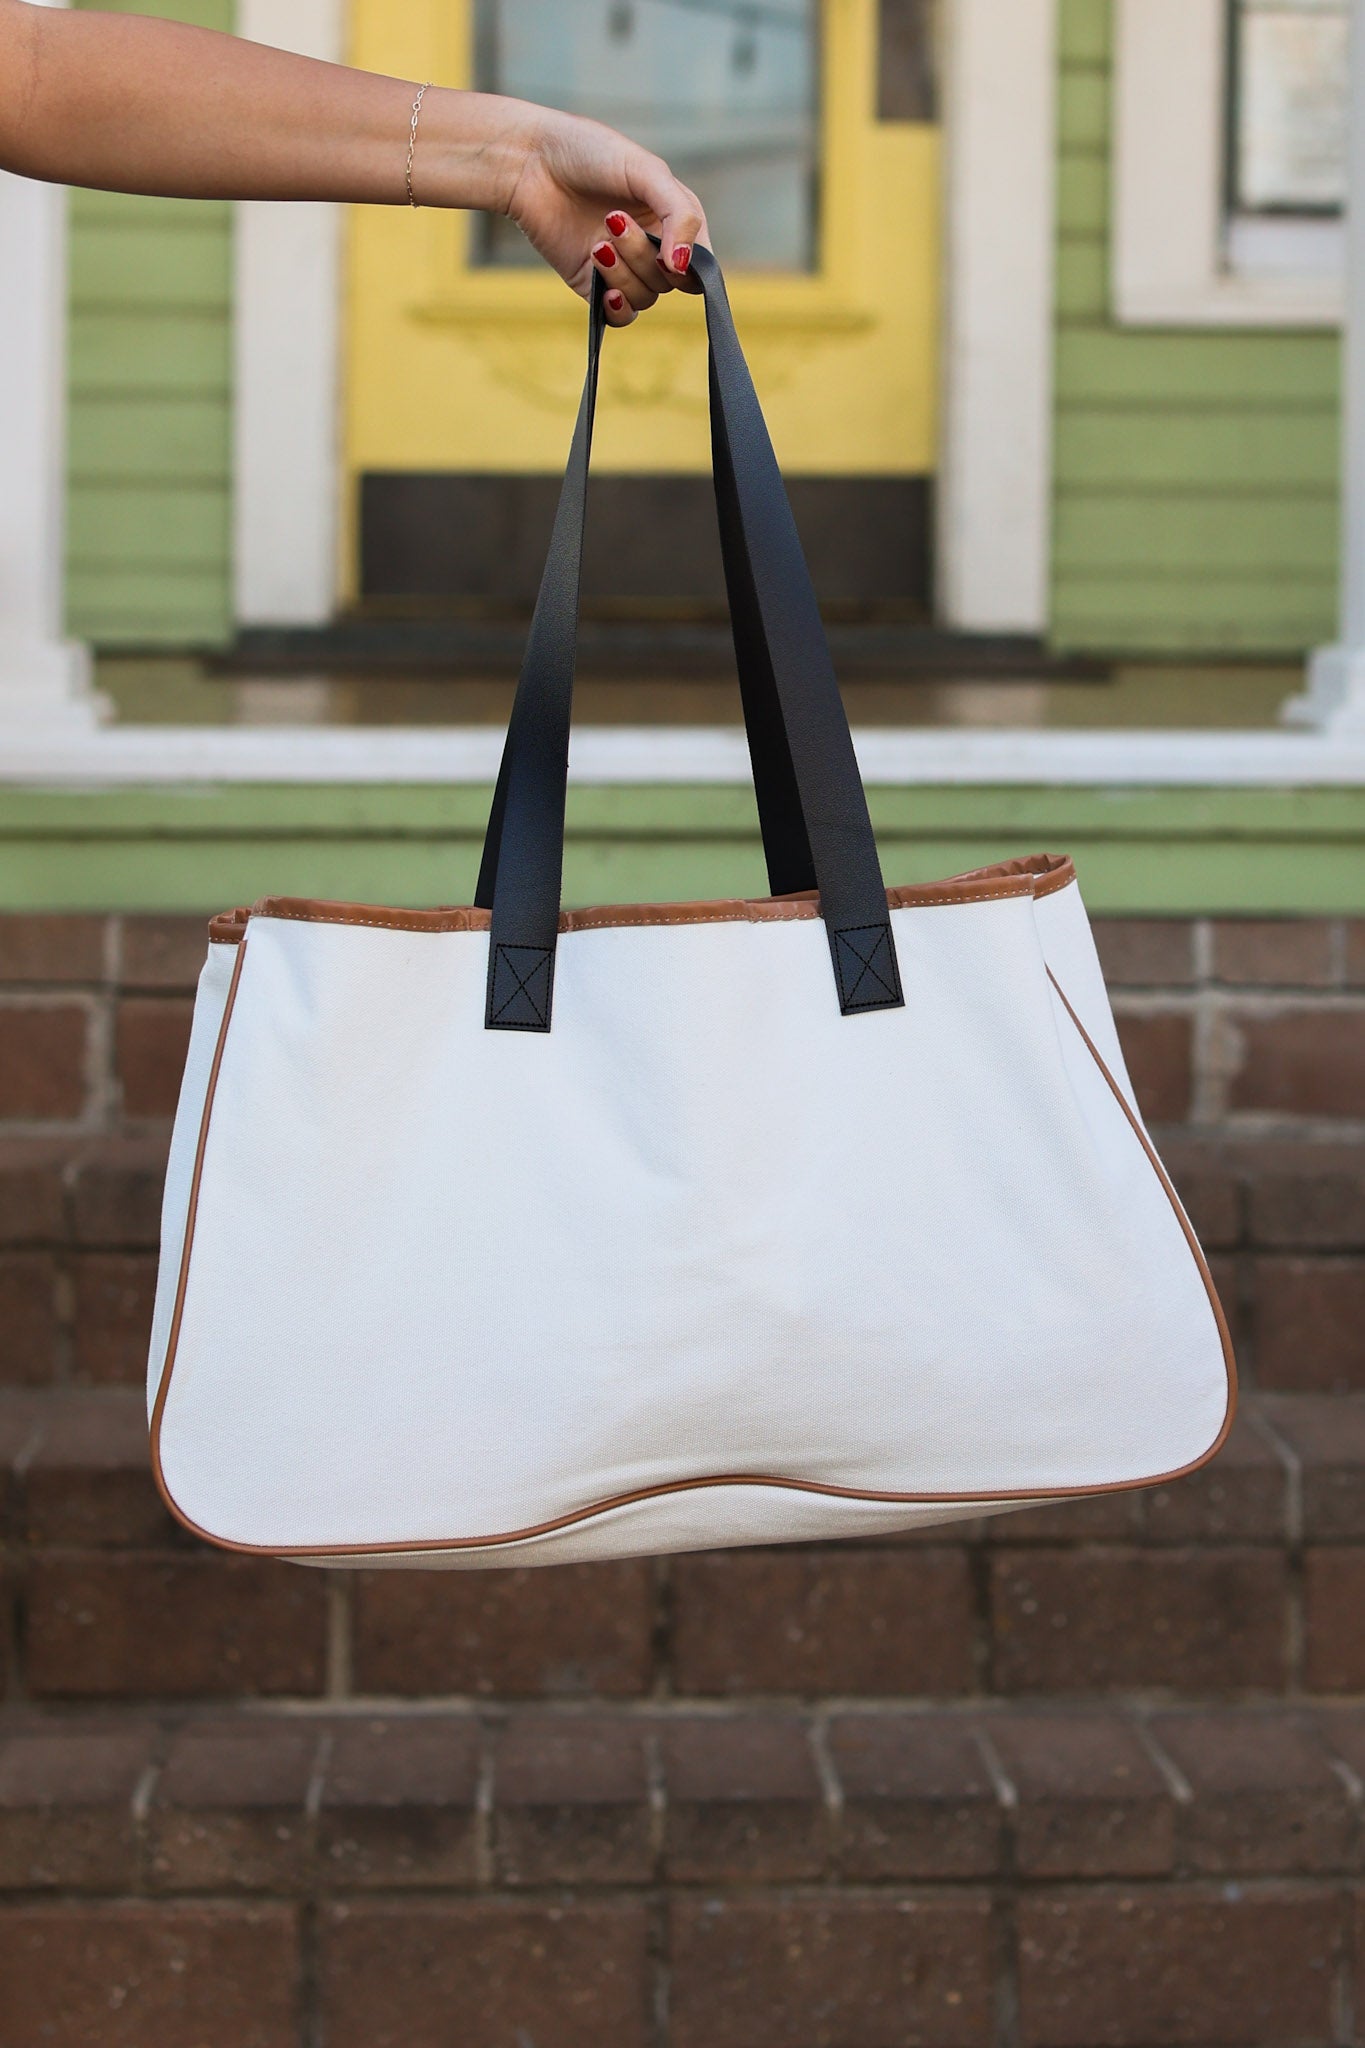 IN STOCK Canvas Bag - Weekend Vibes